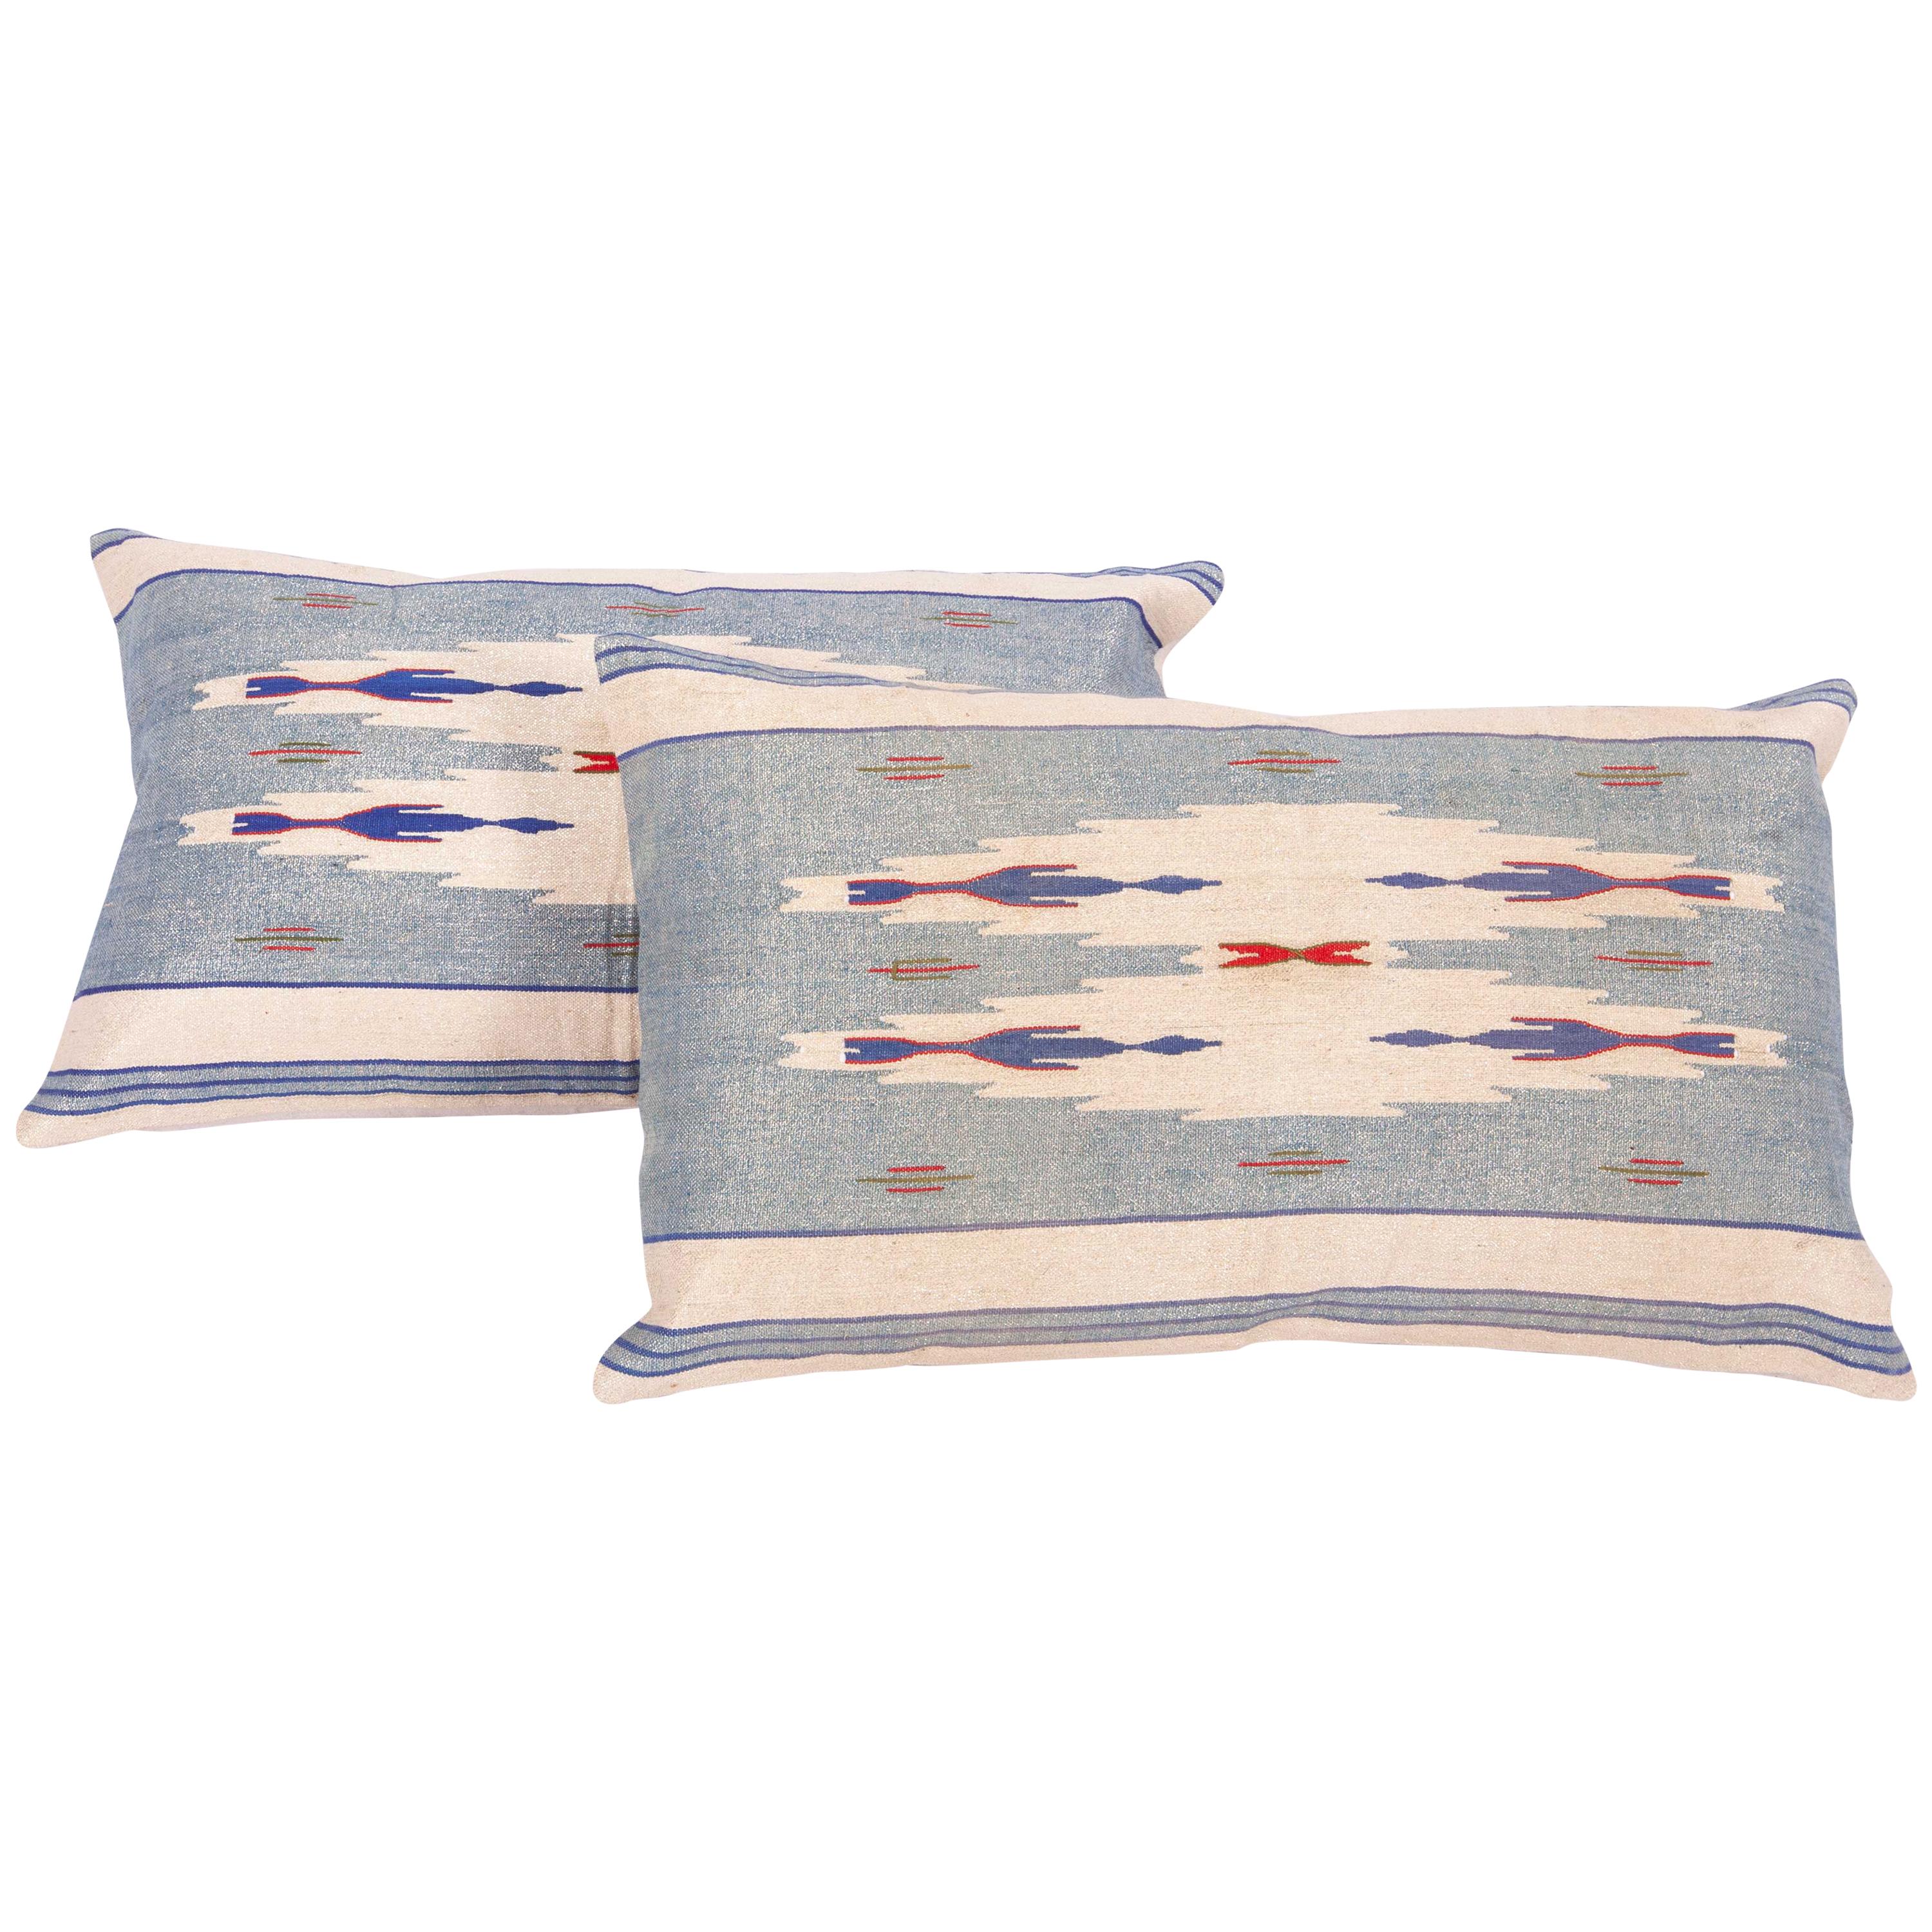 Pillow Cases Fashioned from an Early 20th Century Syrian Textile